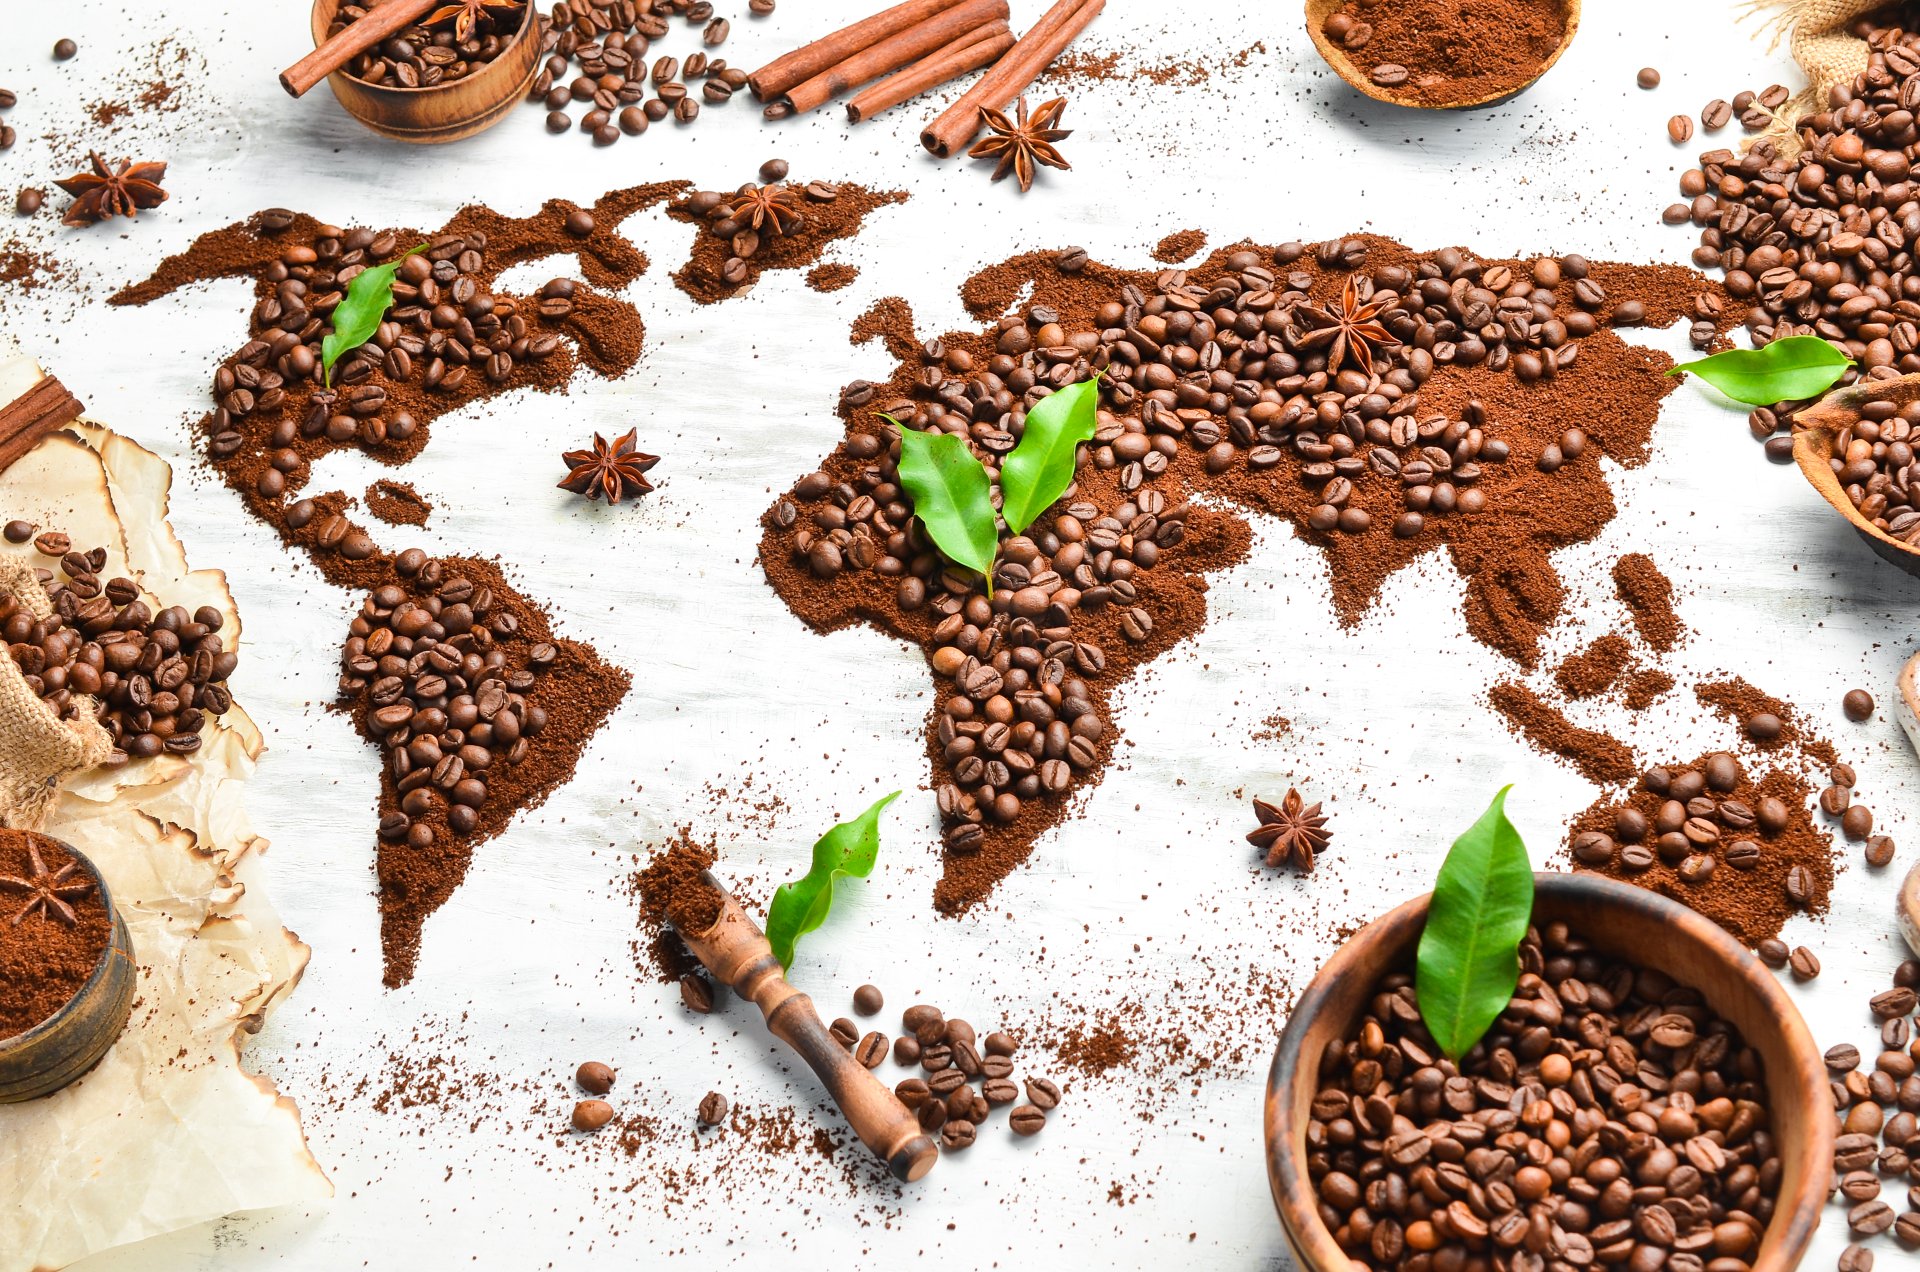 World map made of coffee beans and coffee ground